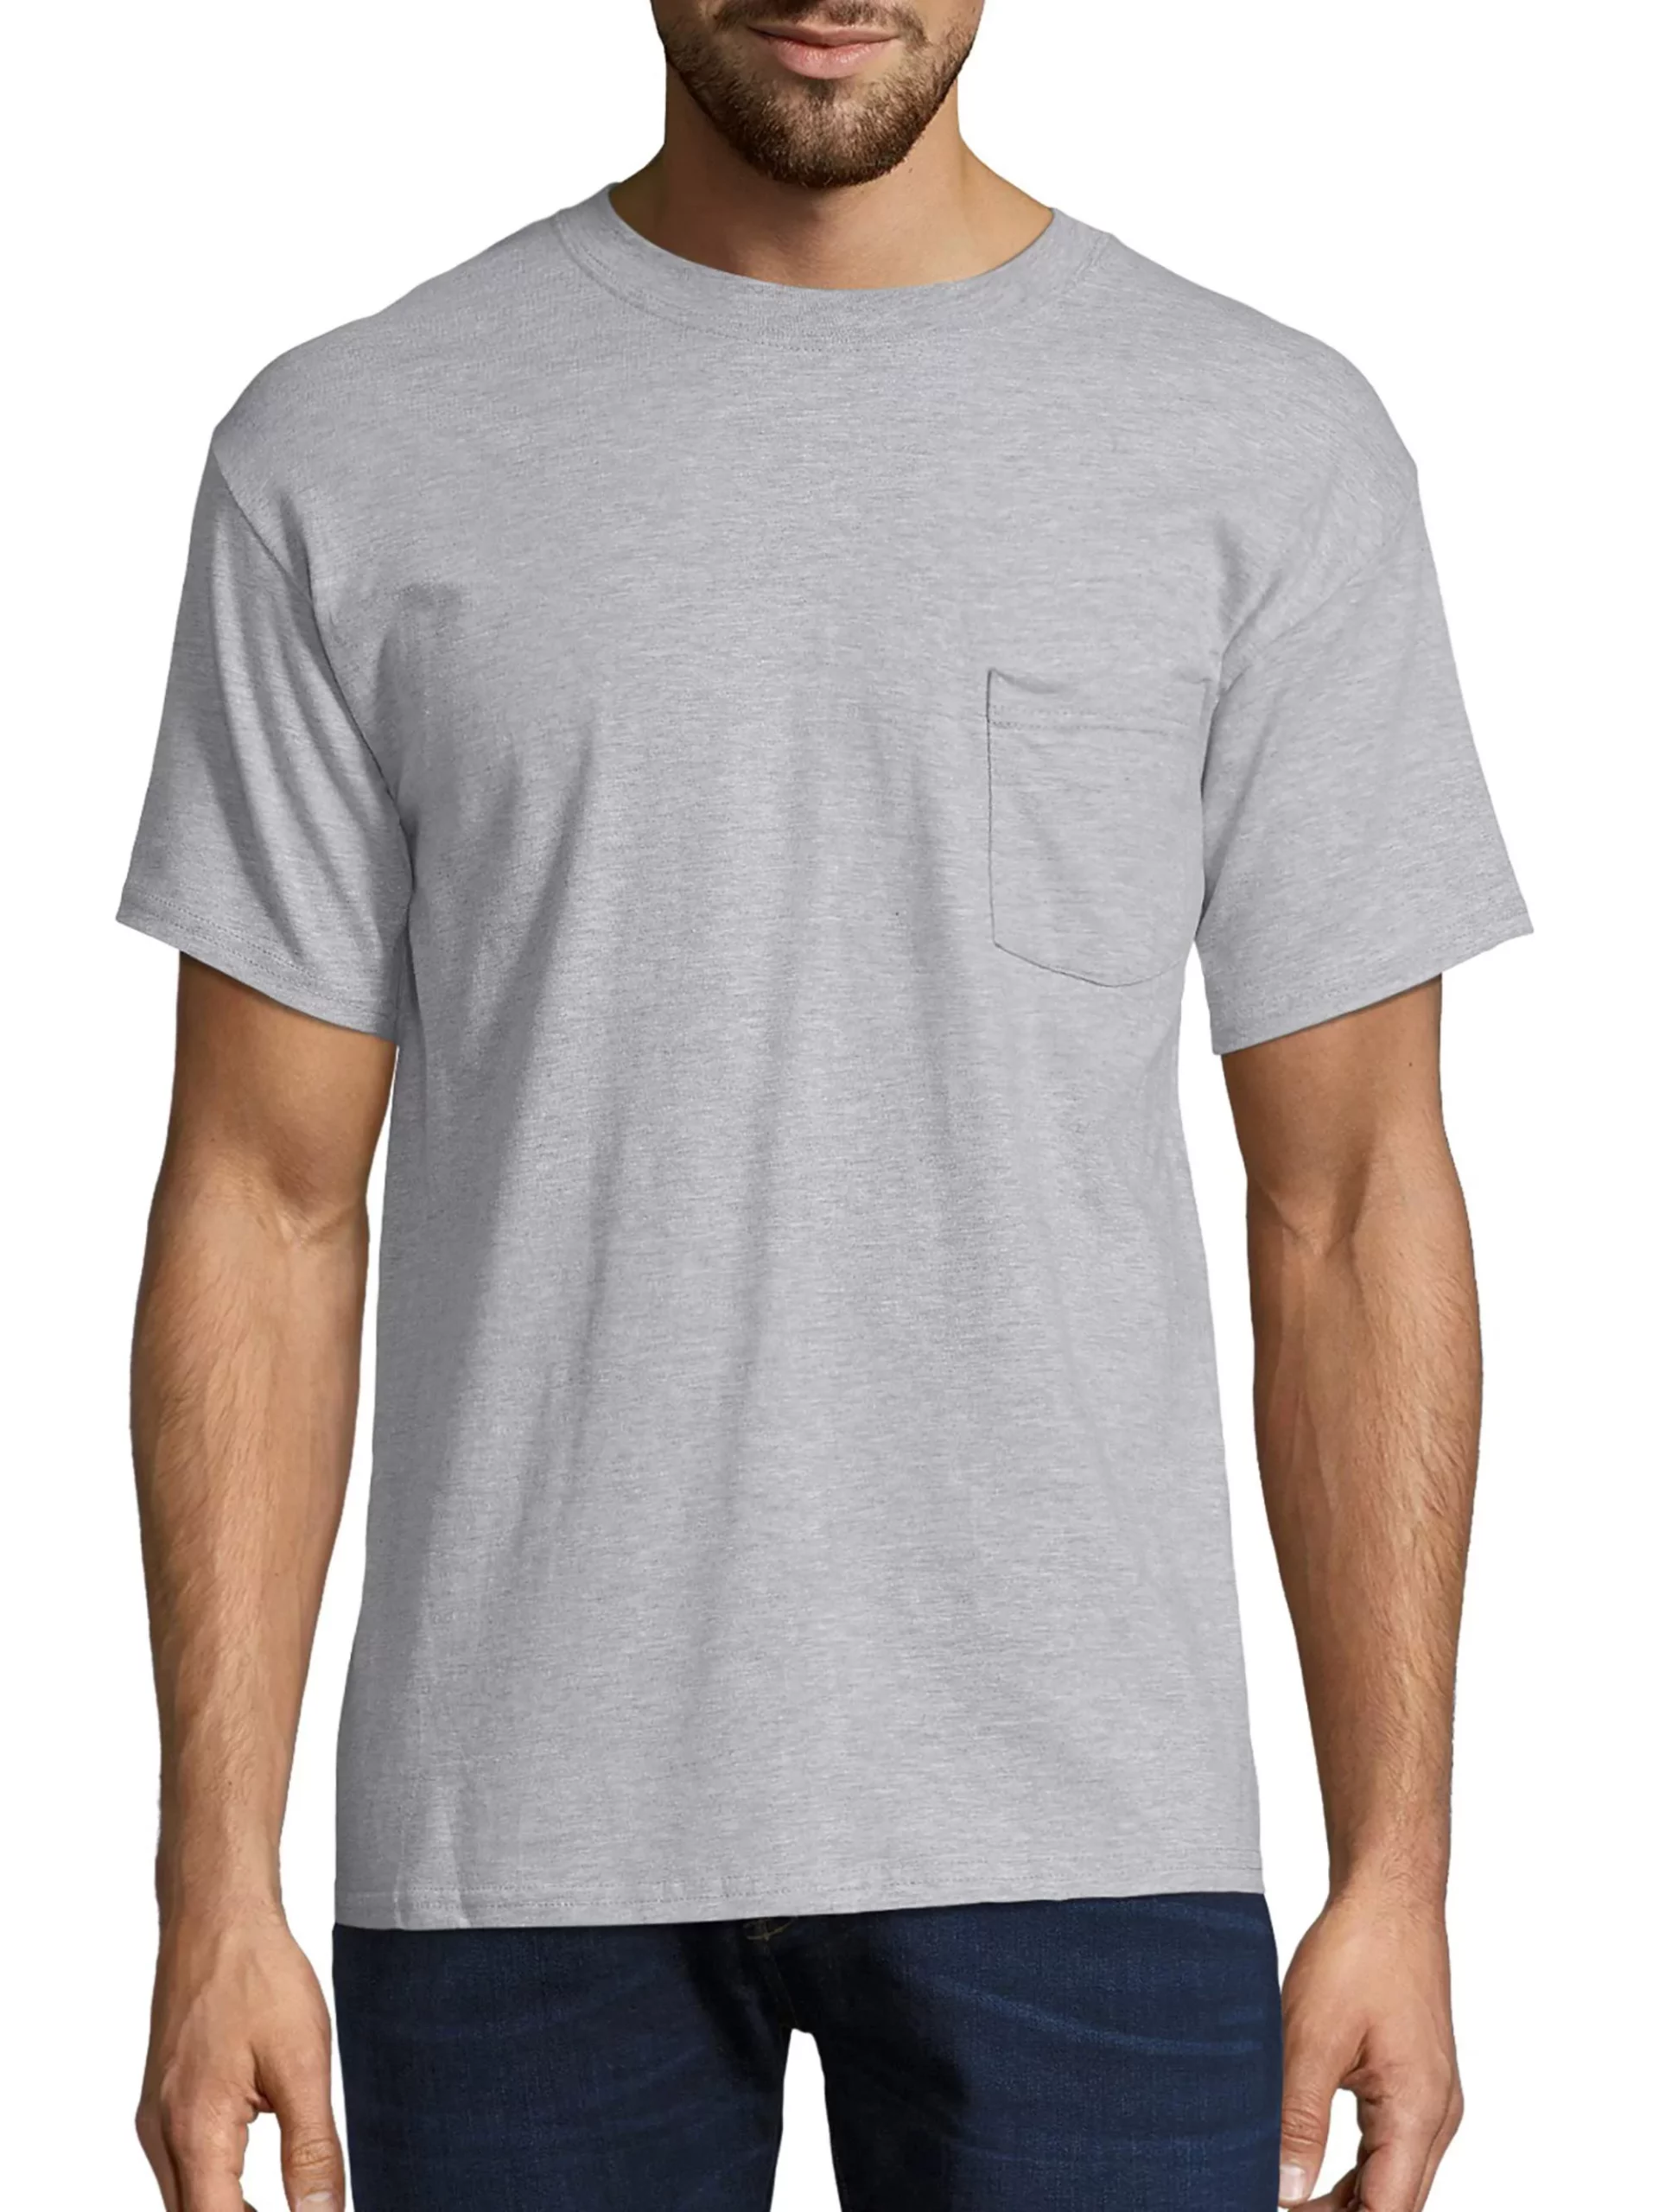 Soft and Durable Hanes Mens Tagless Short Sleeve Pocket T Shirt for Everyday Comfort